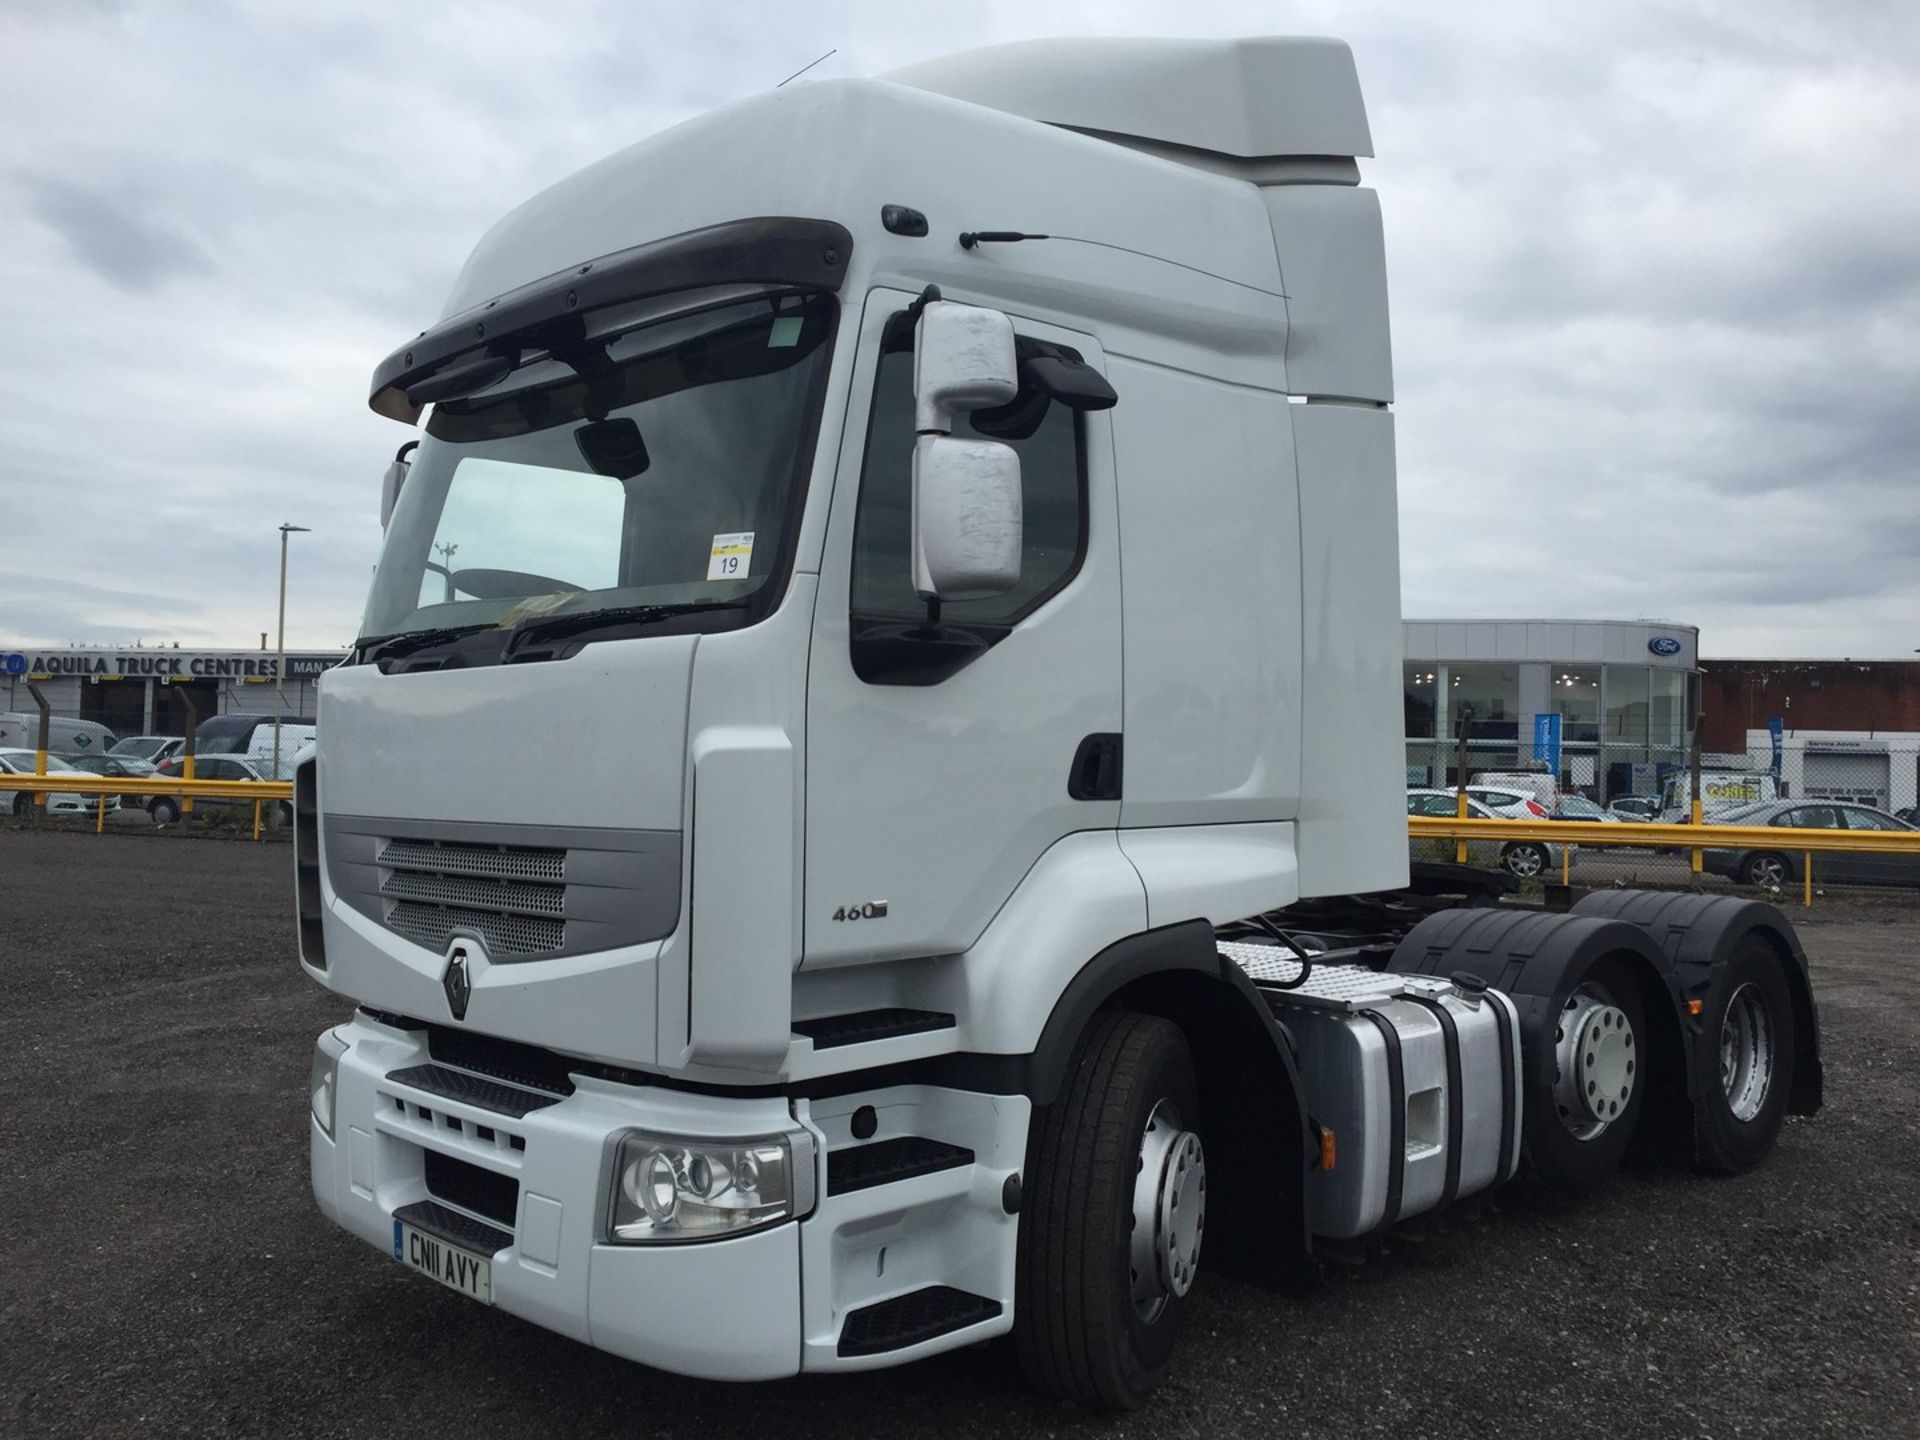 2011, Renault Premium Privilege 460 6x2 Tractor Unit, Reg No. CN11 AVY, KMS 729,283 approx. - Image 4 of 12